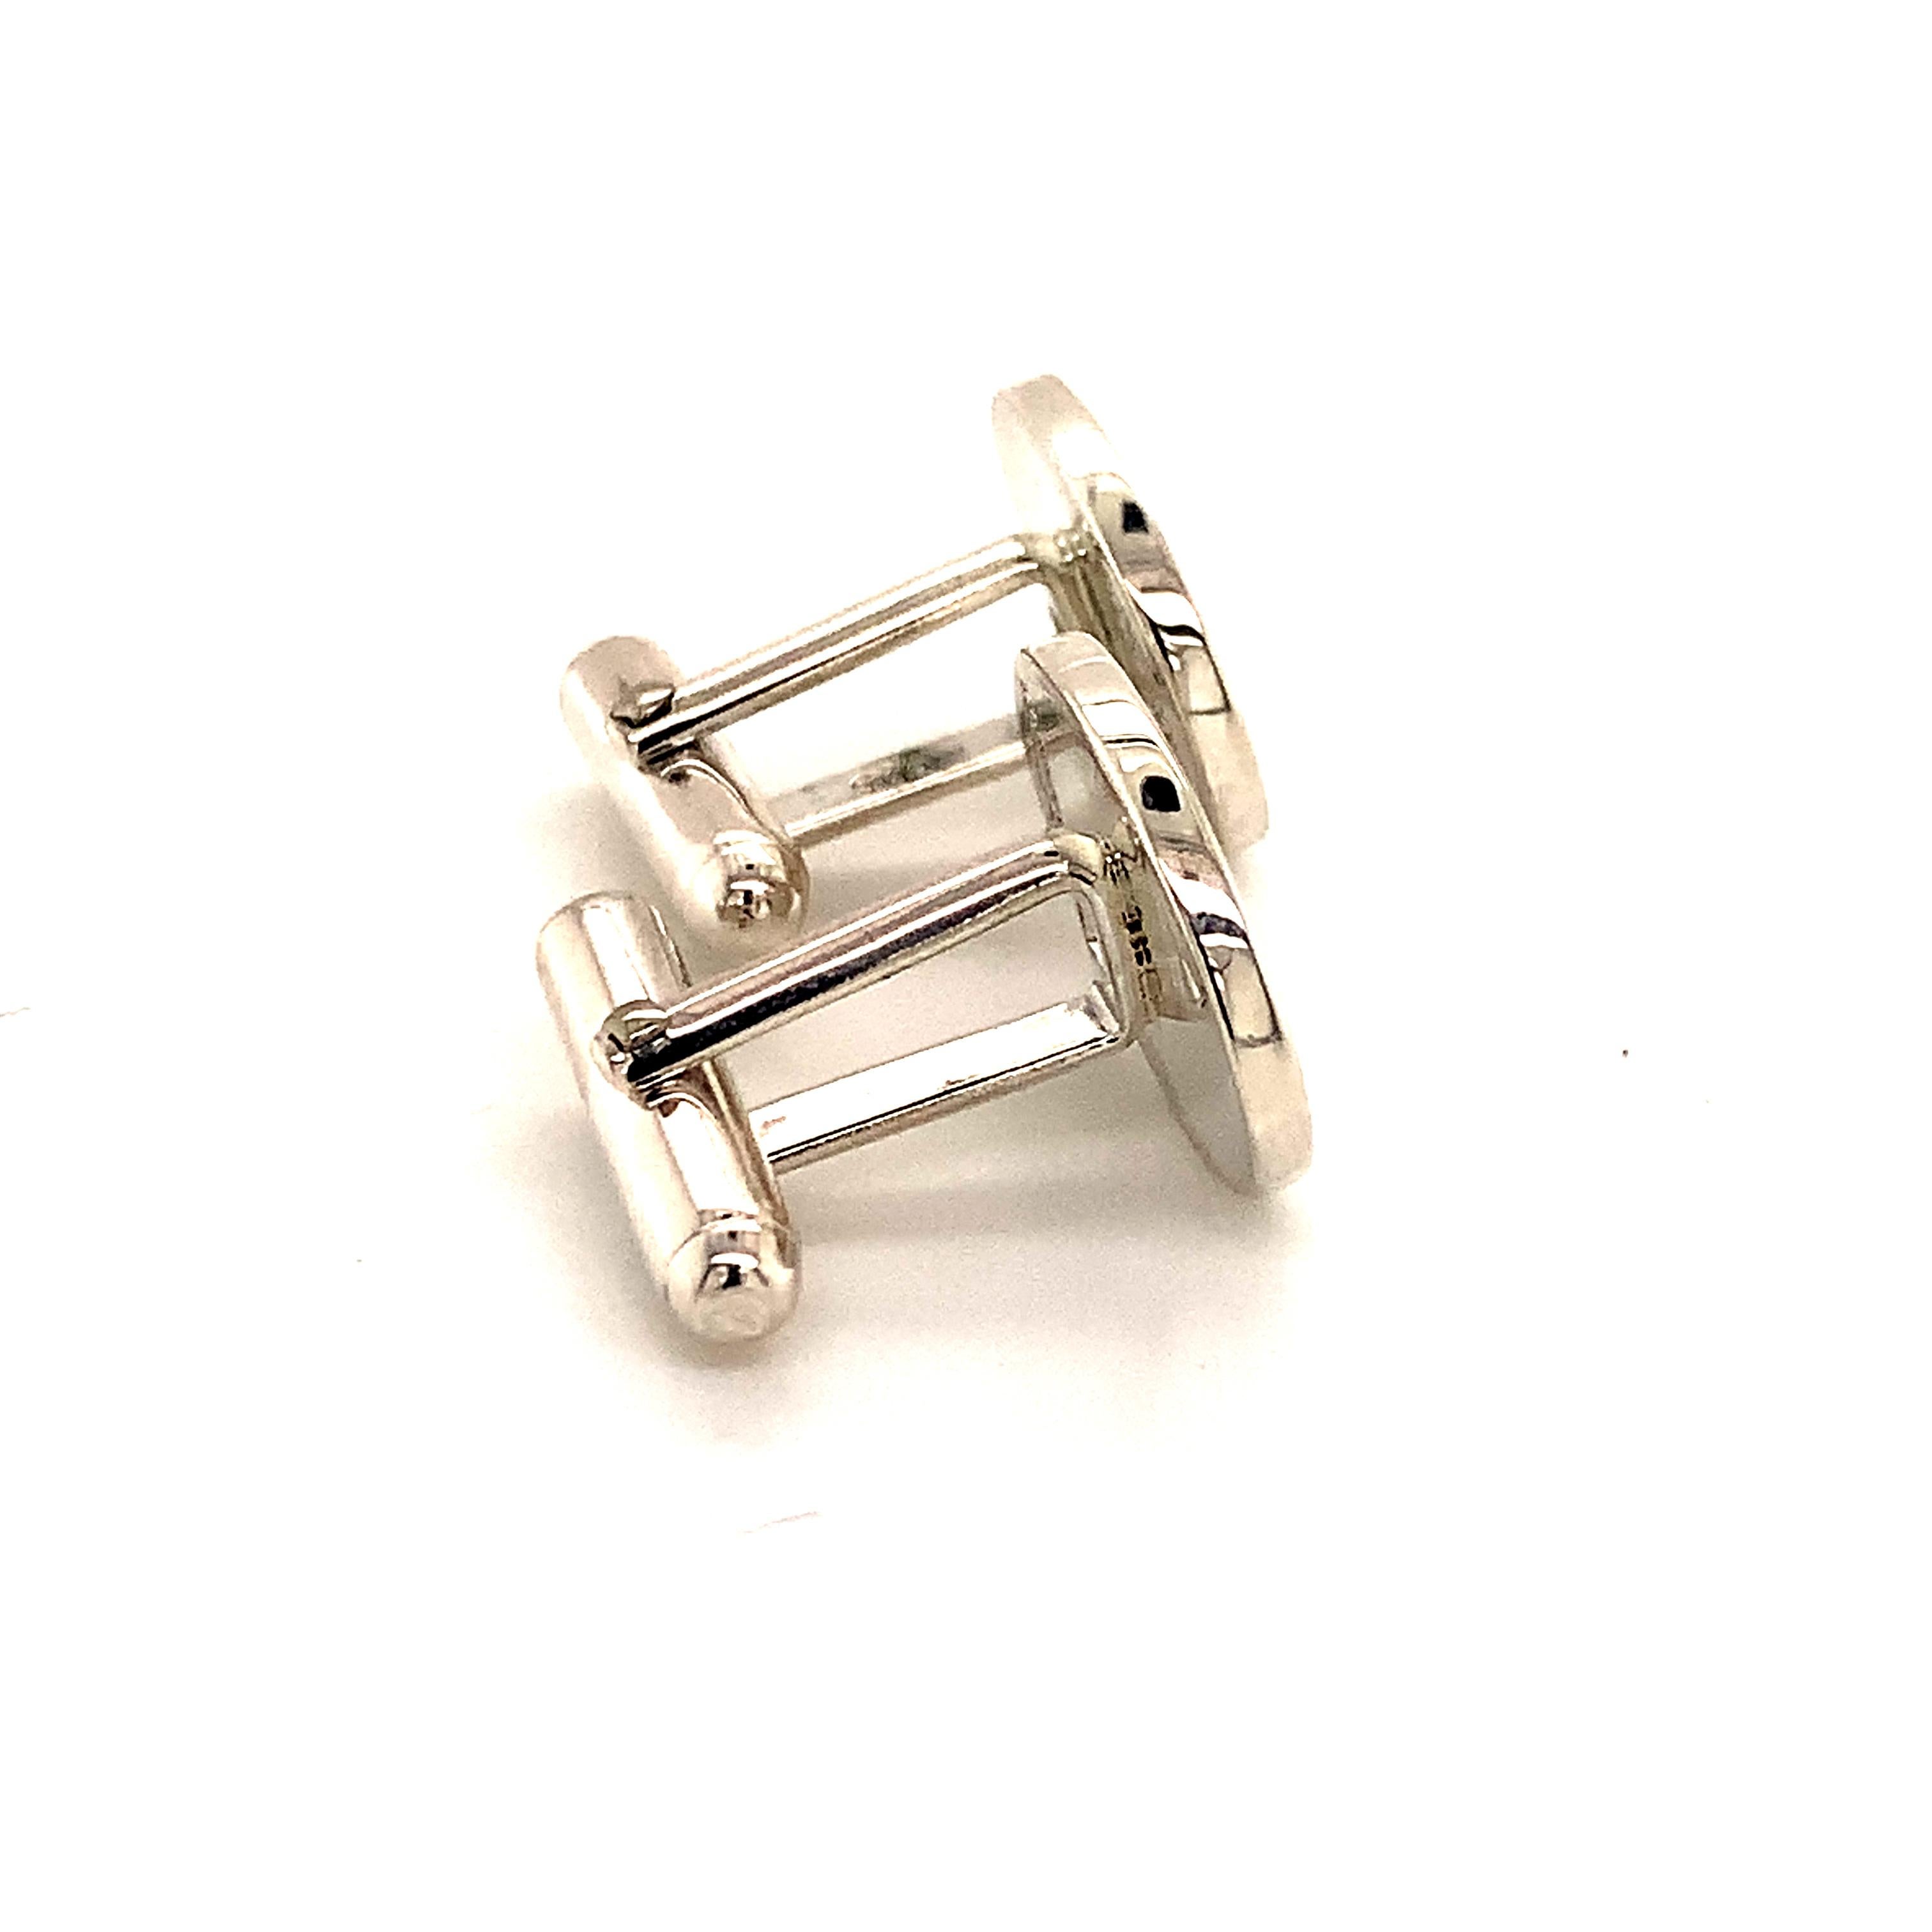 Tiffany & Co. Estate Cufflinks Sterling Silver 12.28 Grams TIF42
 
This elegant Authentic Tiffany & Co Men's Cufflinks has a weight of 12.28 Grams.
 
The Tiffany & Co items have the natural patina As they are estate silver pieces.
 
We polish most